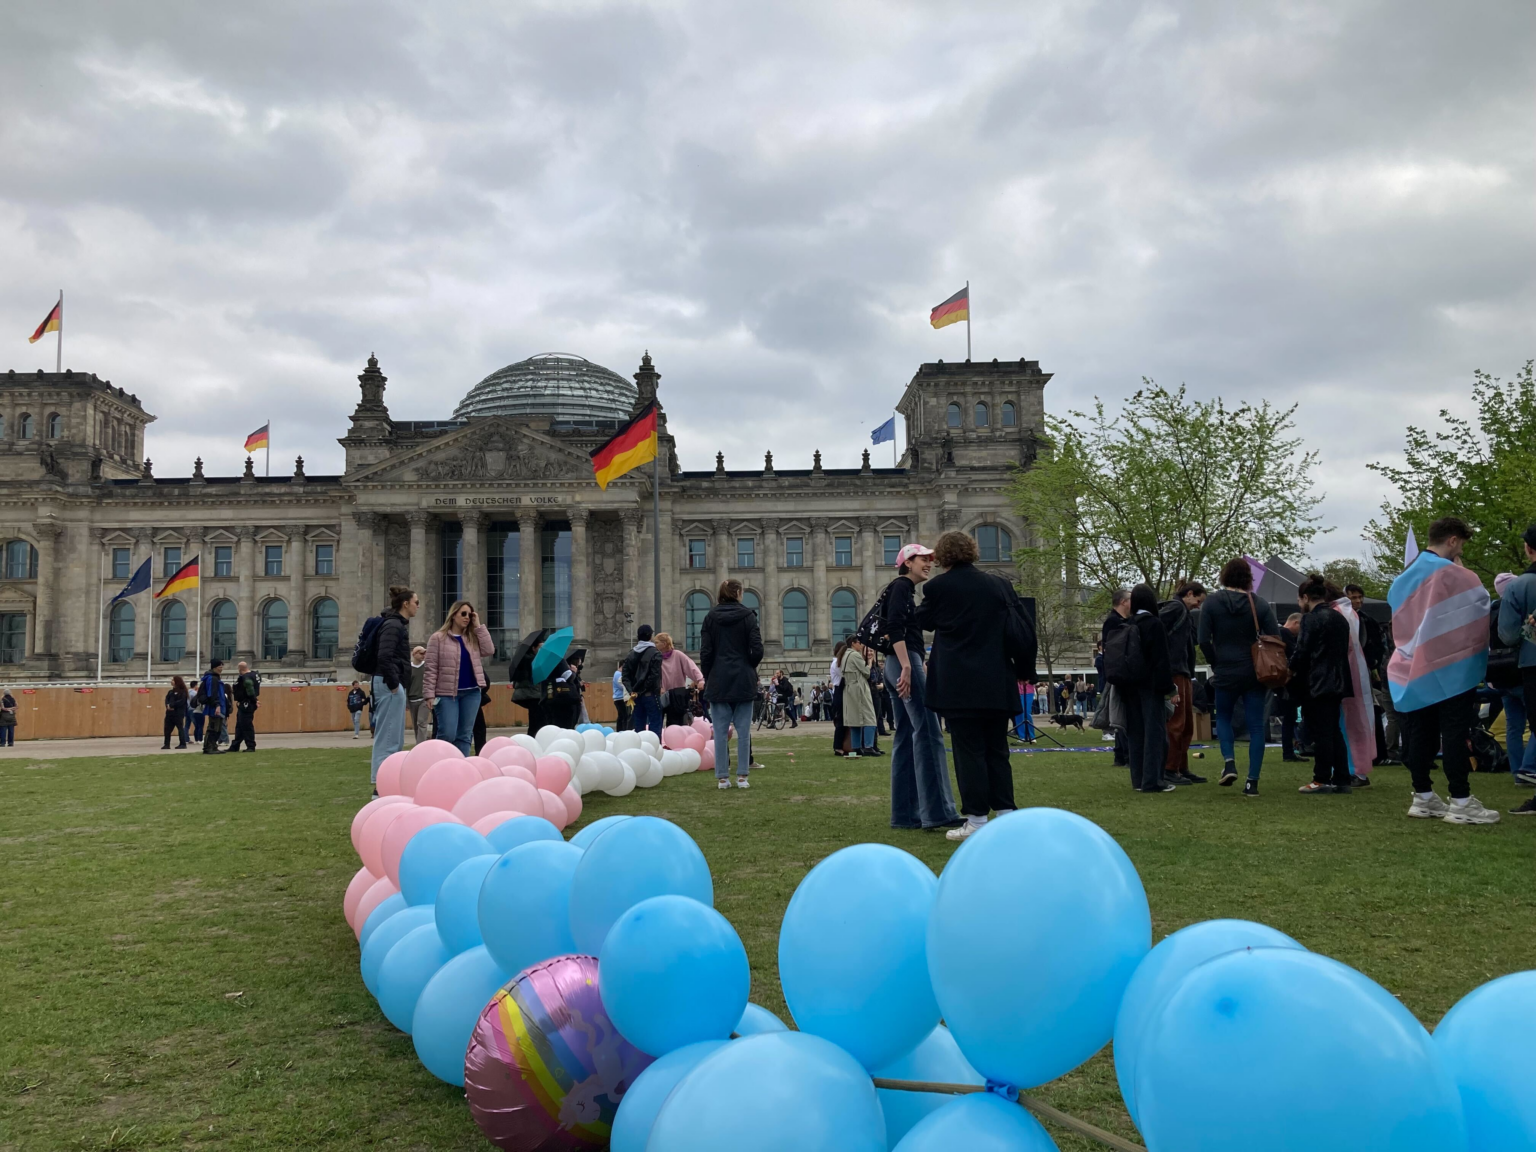 Paradigm shift with mixed feelings: Germany finally adopts gender self-determination law